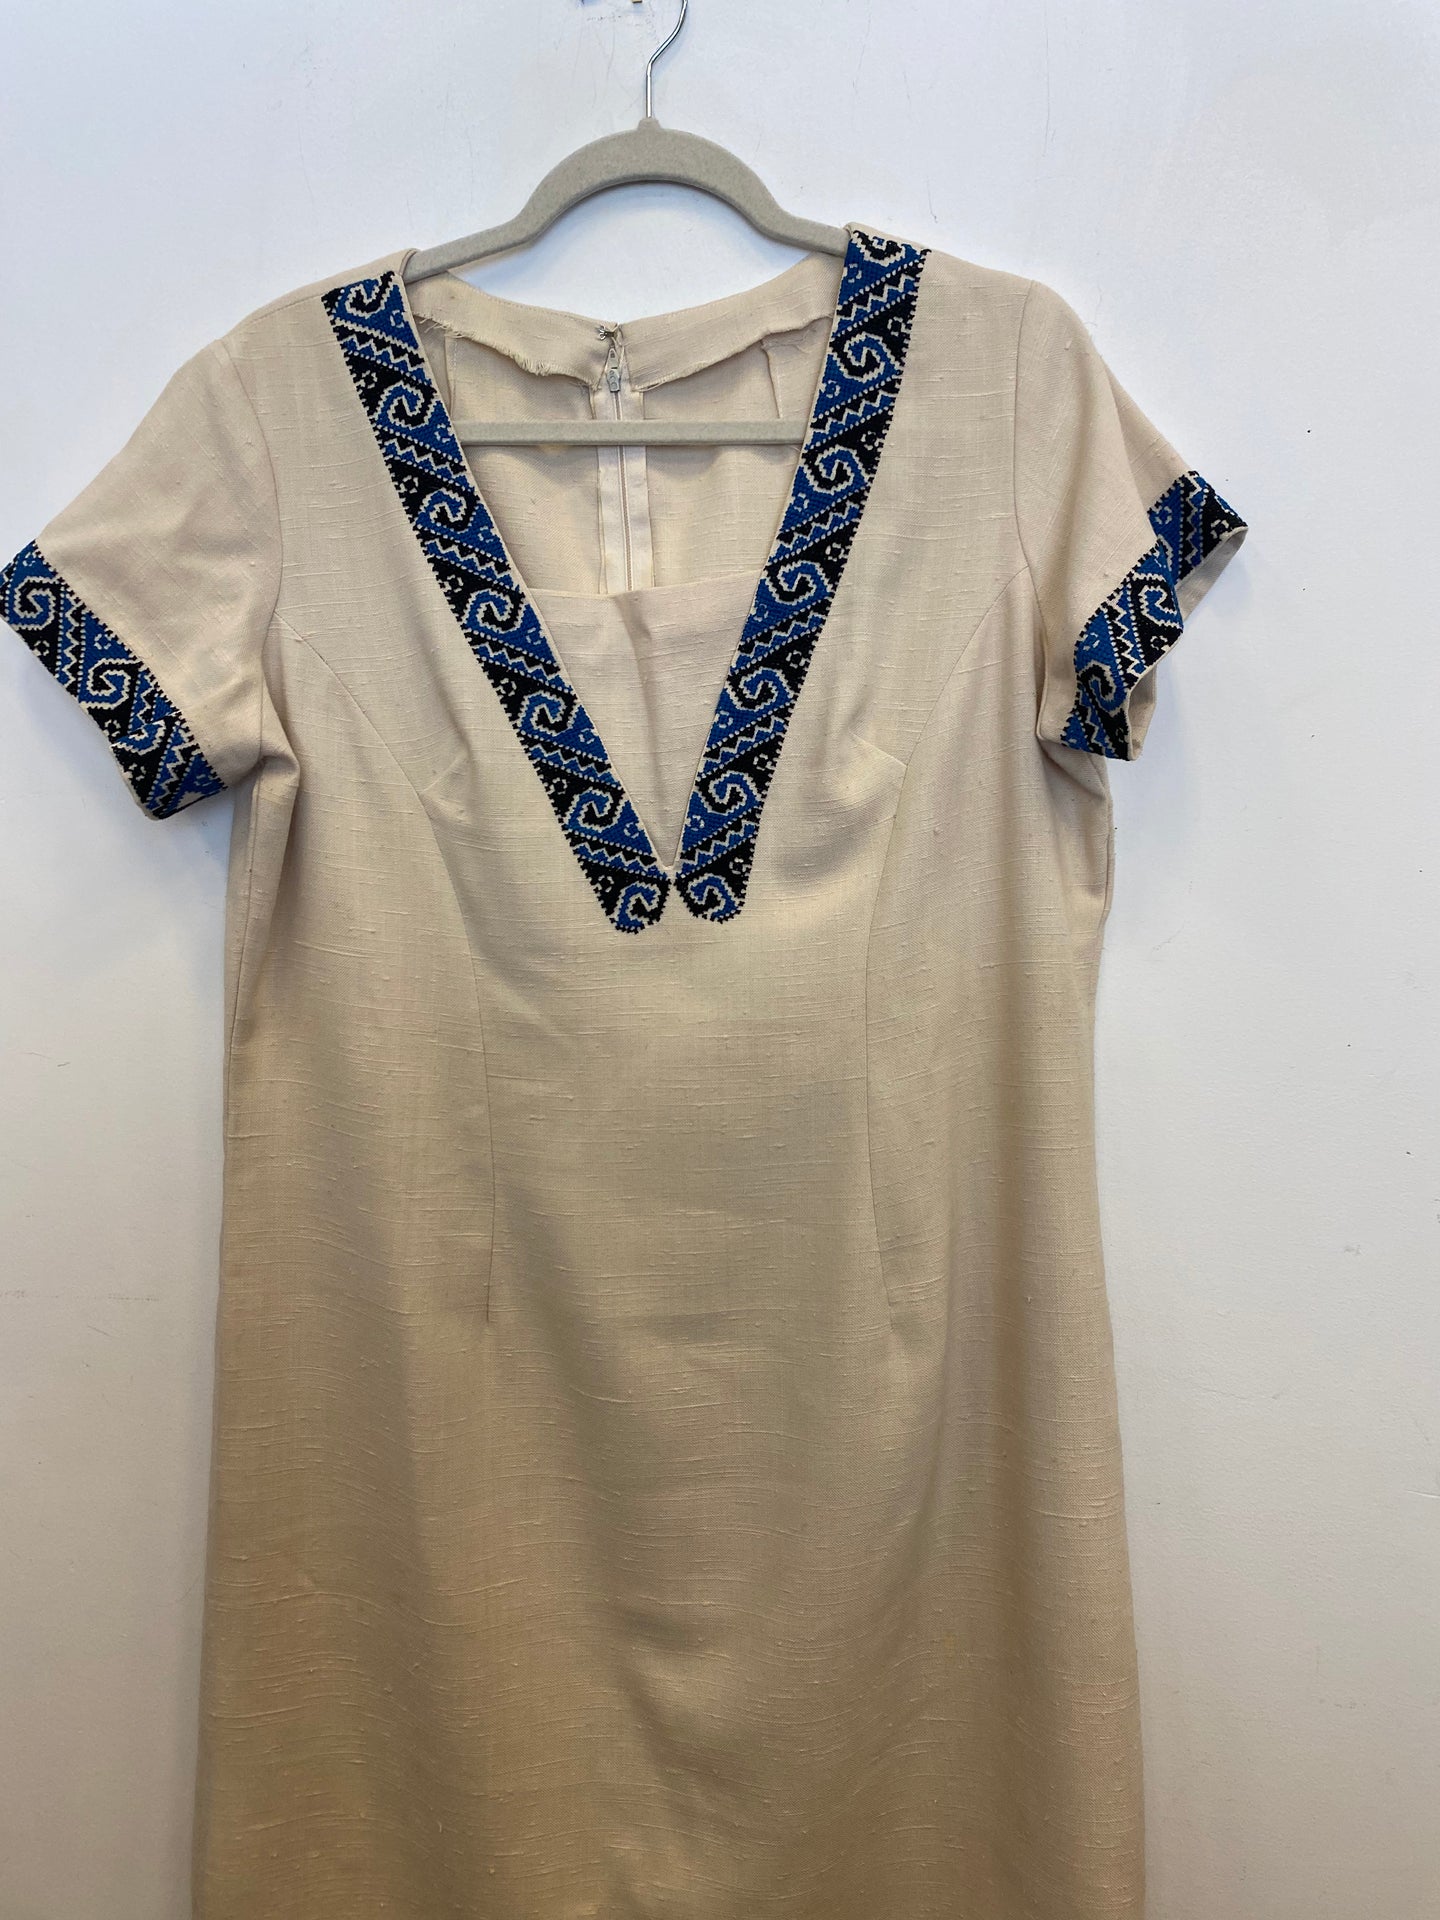 Vintage Womens Embroidered Dress   #125